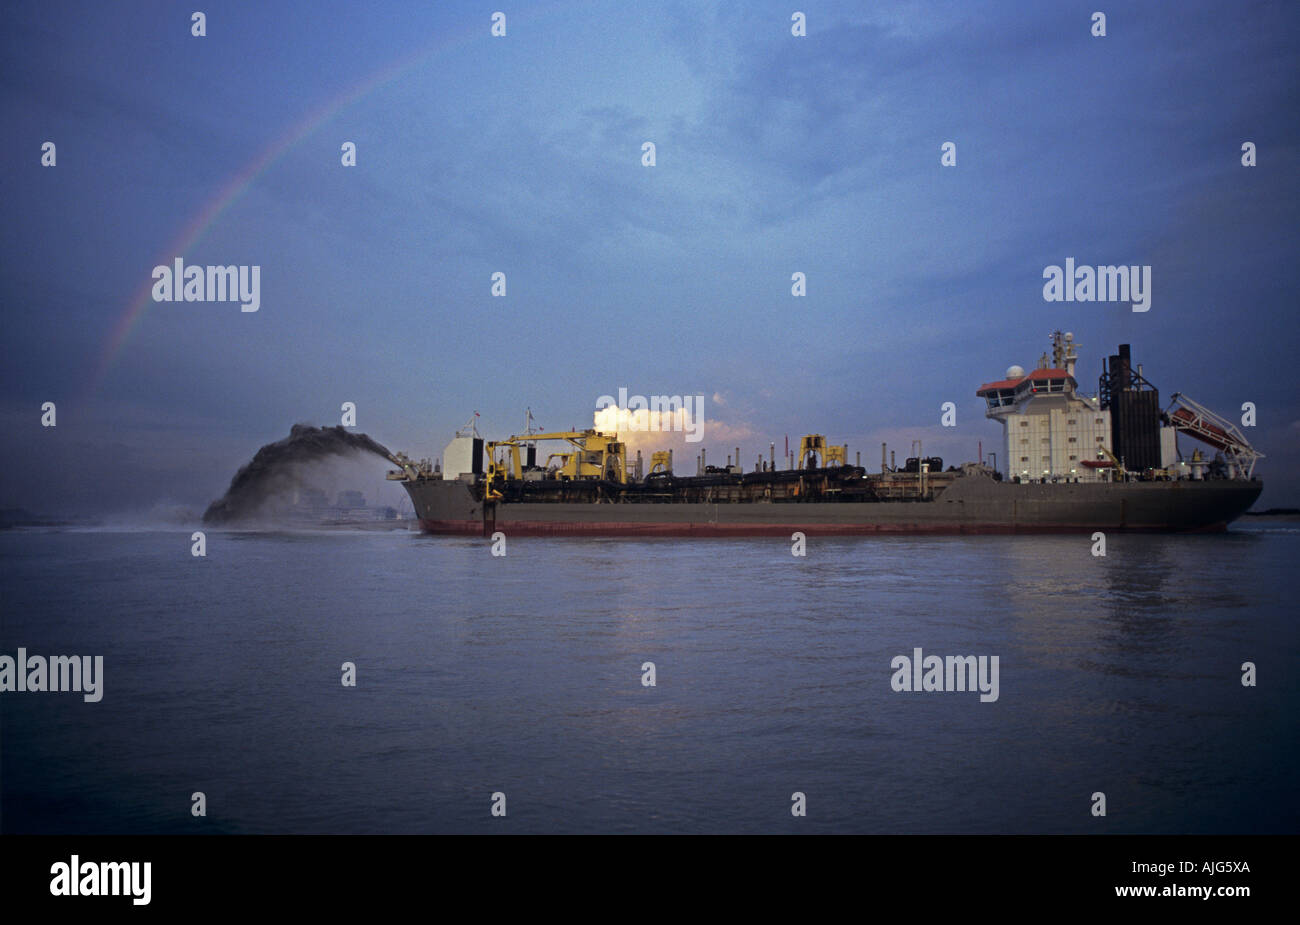 Dredger rainbowing or discharging cargo of sand for land reclamation project, Singapore Stock Photo